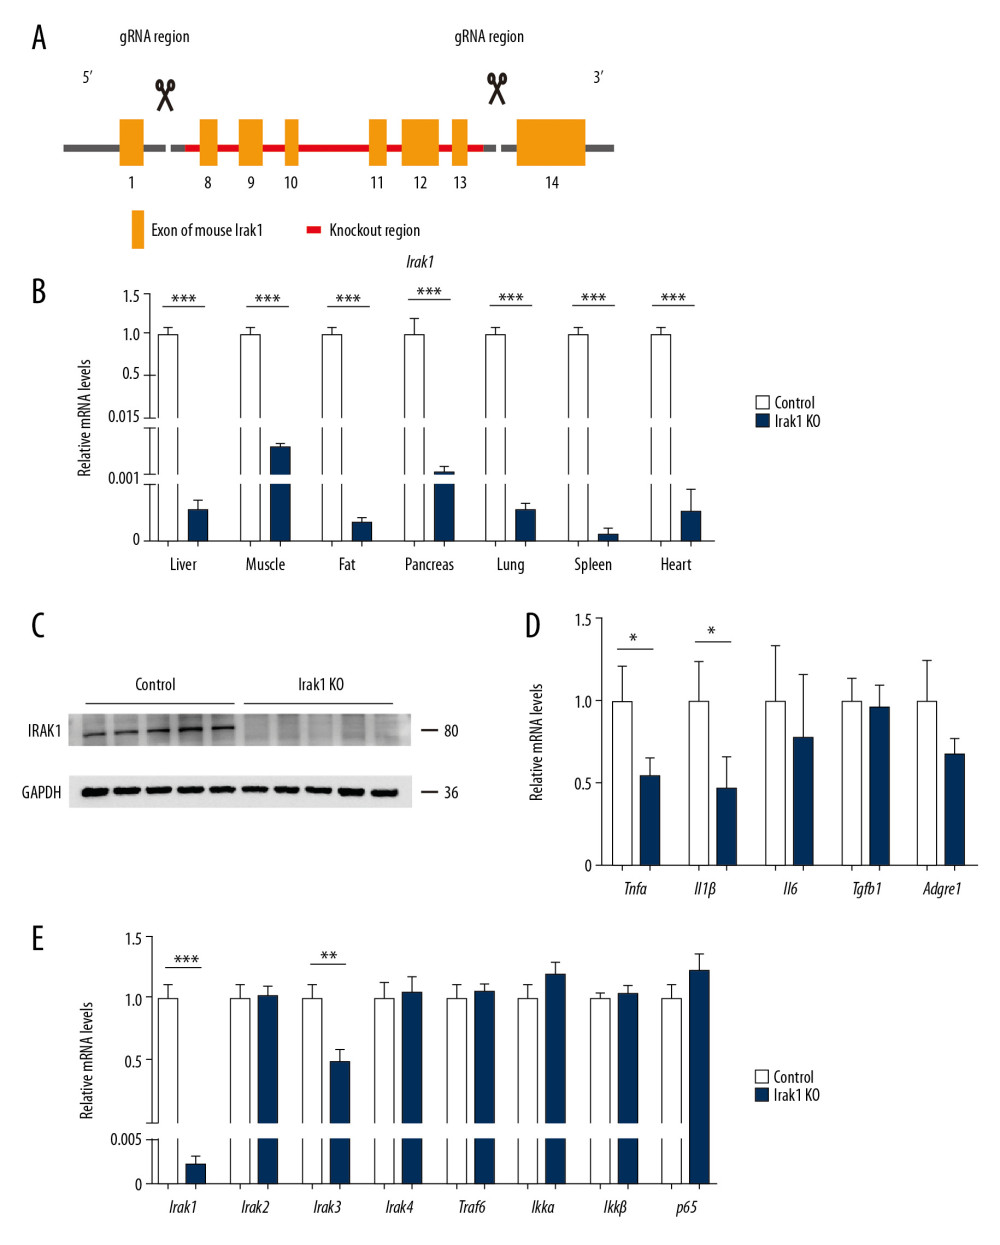 Generation of Irak1 KO mice. (A) Schematic representation of the generation of Irak1 KO mice. (B) Levels of Irak1 mRNA in various tissues of Irak1 KO and control mice (n=6 each). (C) Levels of IRAK1 protein in the livers of Irak1 KO and control mice (n=5 each). (D) Hepatic levels of Tnfα, Il1β, Il6, Tgfb1, and Adgre1 mRNAs in Irak1 KO and control mice (n=6 each). (E) Hepatic levels of Irak1, Irak2, Irak3, Irak4, Traf6, Ikkα, Ikkβ, and p65 mRNAs in Irak1 KO and control mice (n=6 each). Data represent mean±SEM. * p<0.05, ** p<0.01, *** p< 0.001, by t tests.